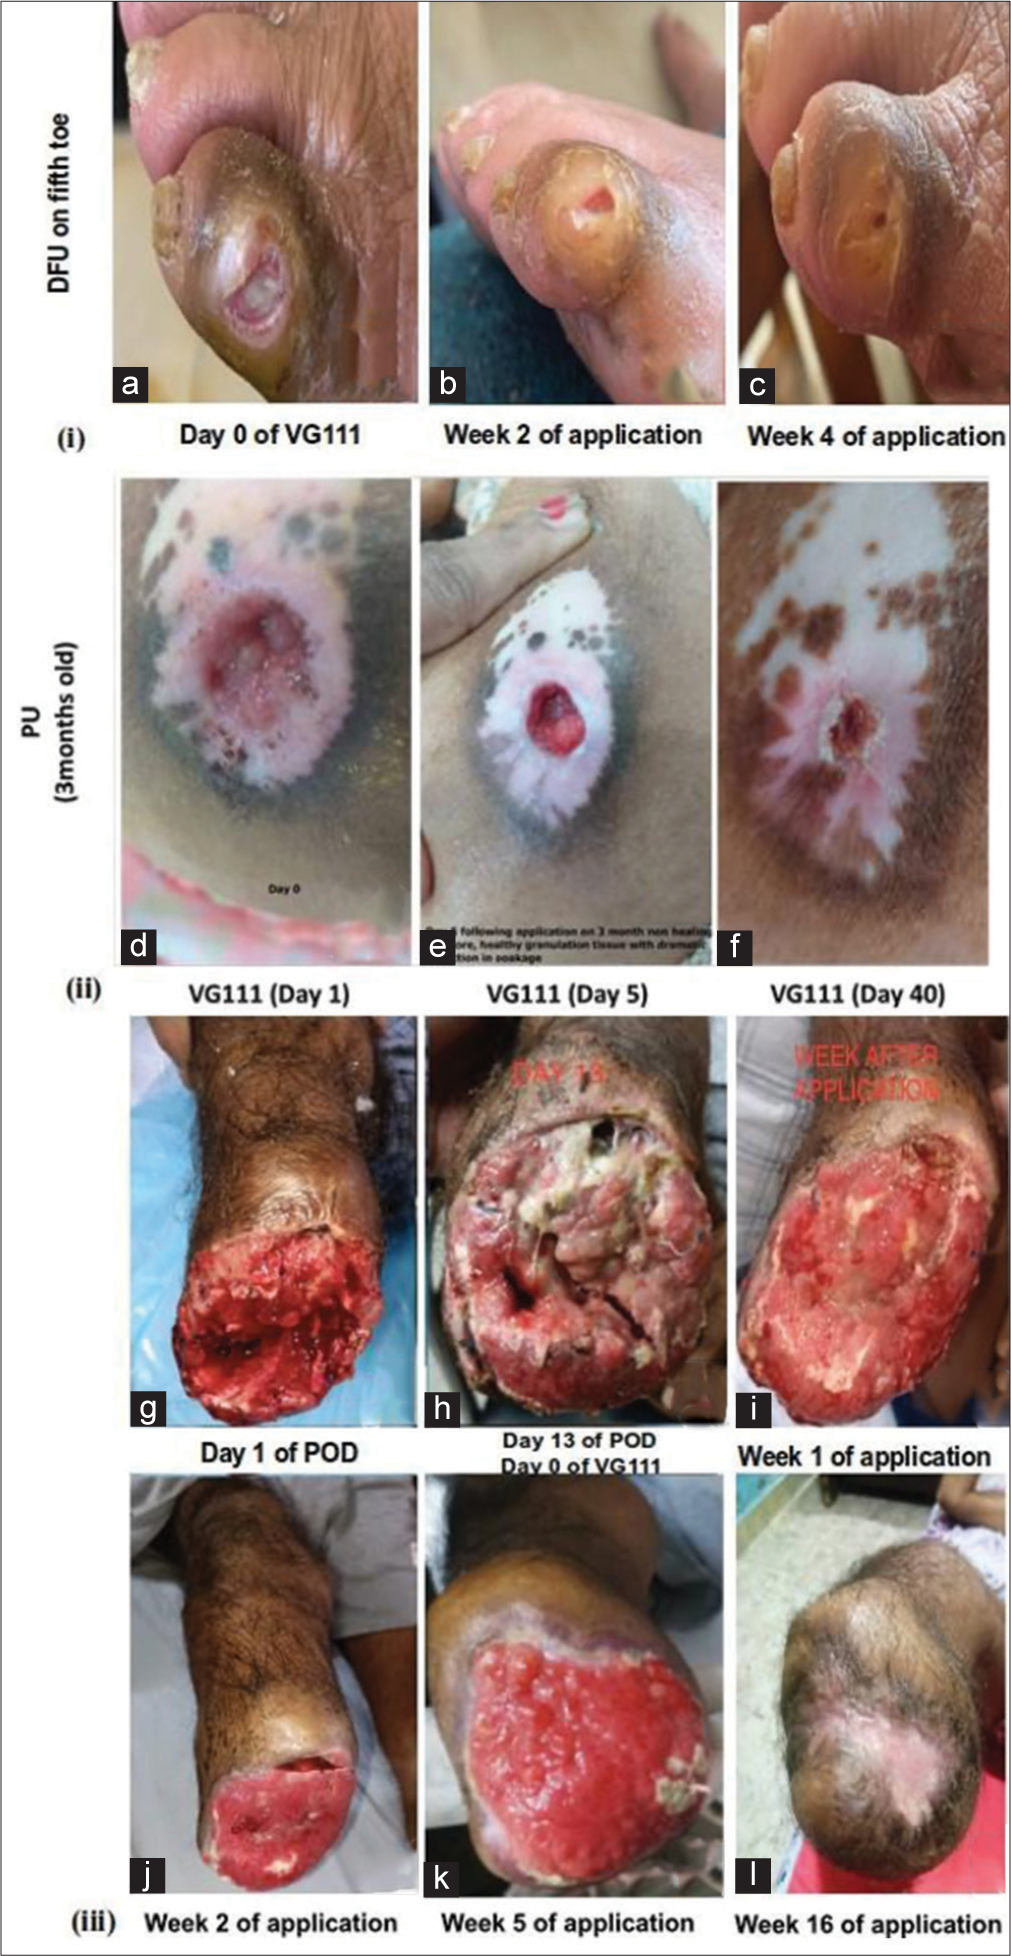 Ulcerated wound and amputated tissue application of VG111 in humans. (i, a-c) Diabetic foot ulcer on fifth toe in 65-year-male, VG111 application was applied on 18th day following povidone-iodine based dressing; (ii, d-f) pressure ulcer on the back of 95-year female and; (iii, g-l) below-knee amputation of a 48-year diabetic male, no antibiotics or graft was required. DFU: Diabetic foot ulcers, PU: Pressure ulcers.